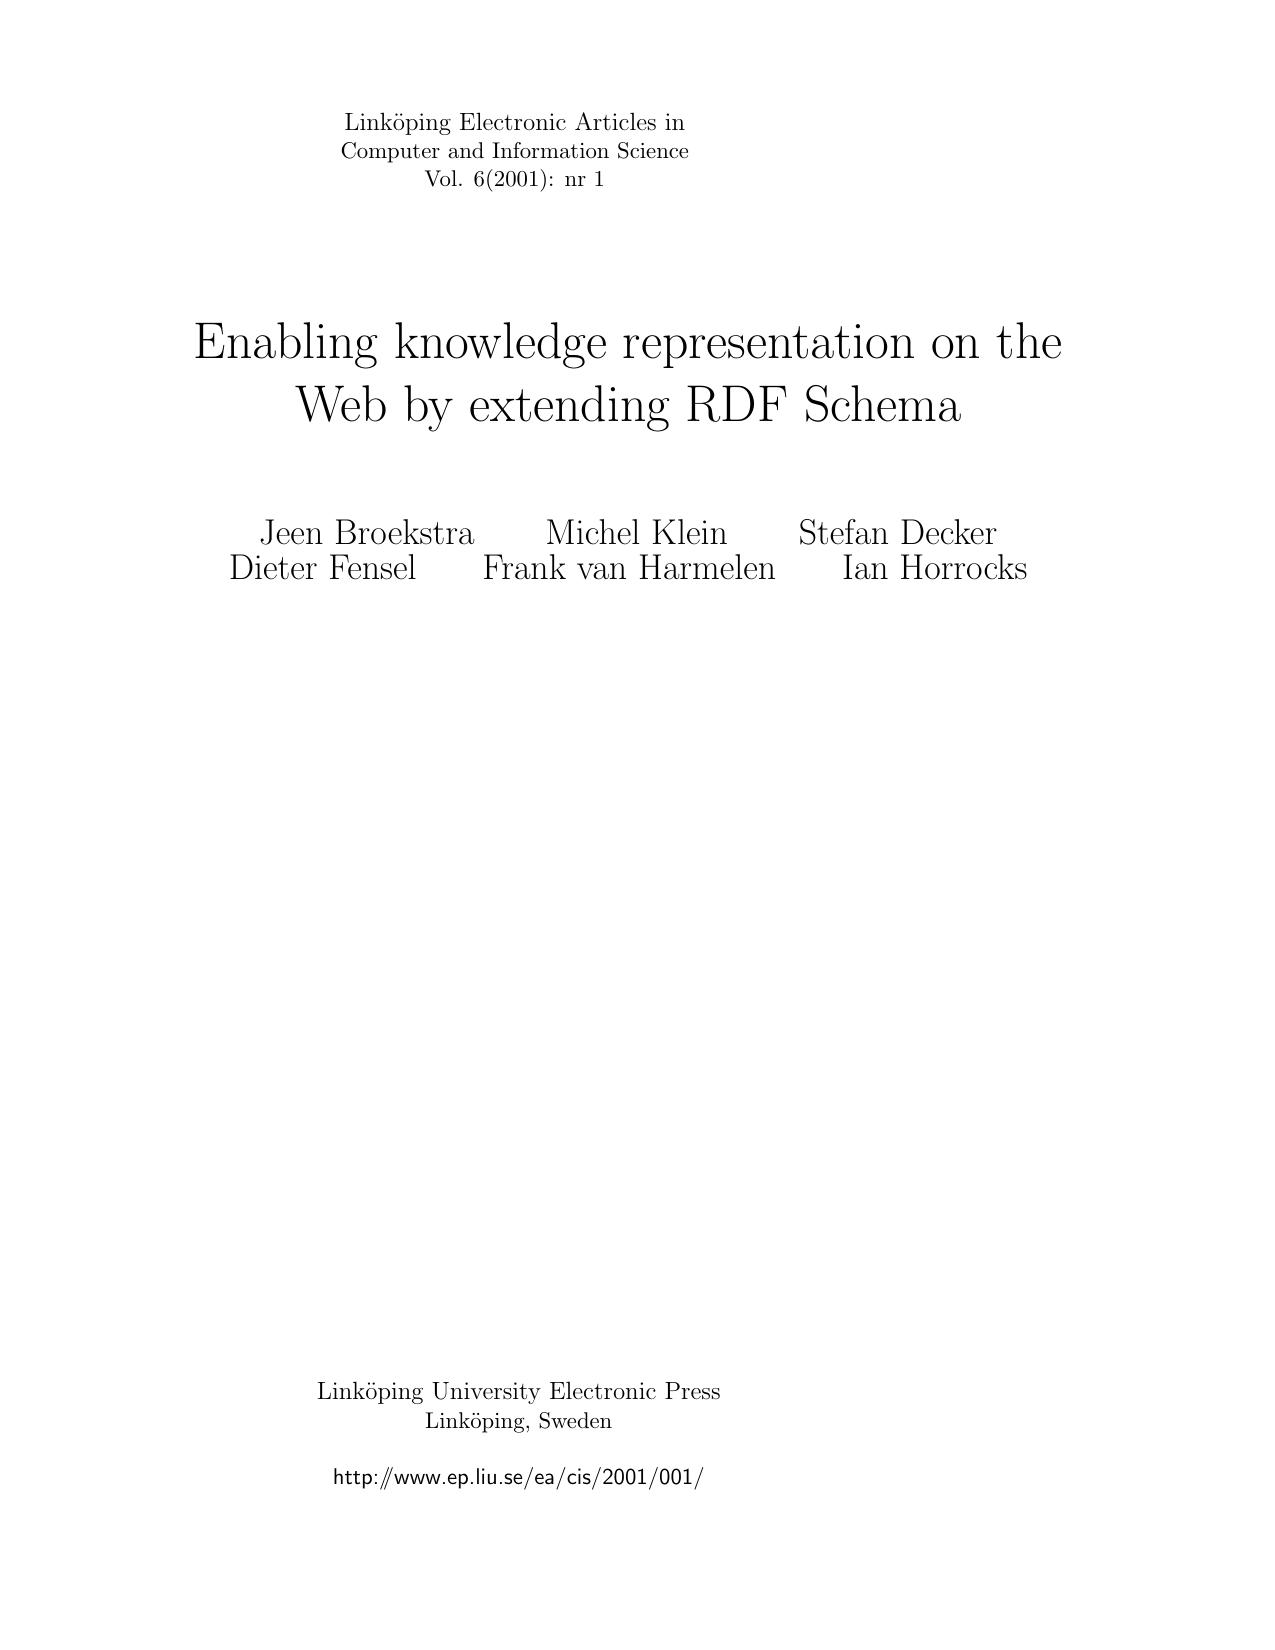 Enabling knowledge representation on the Web by extending RDF Schema - Essay